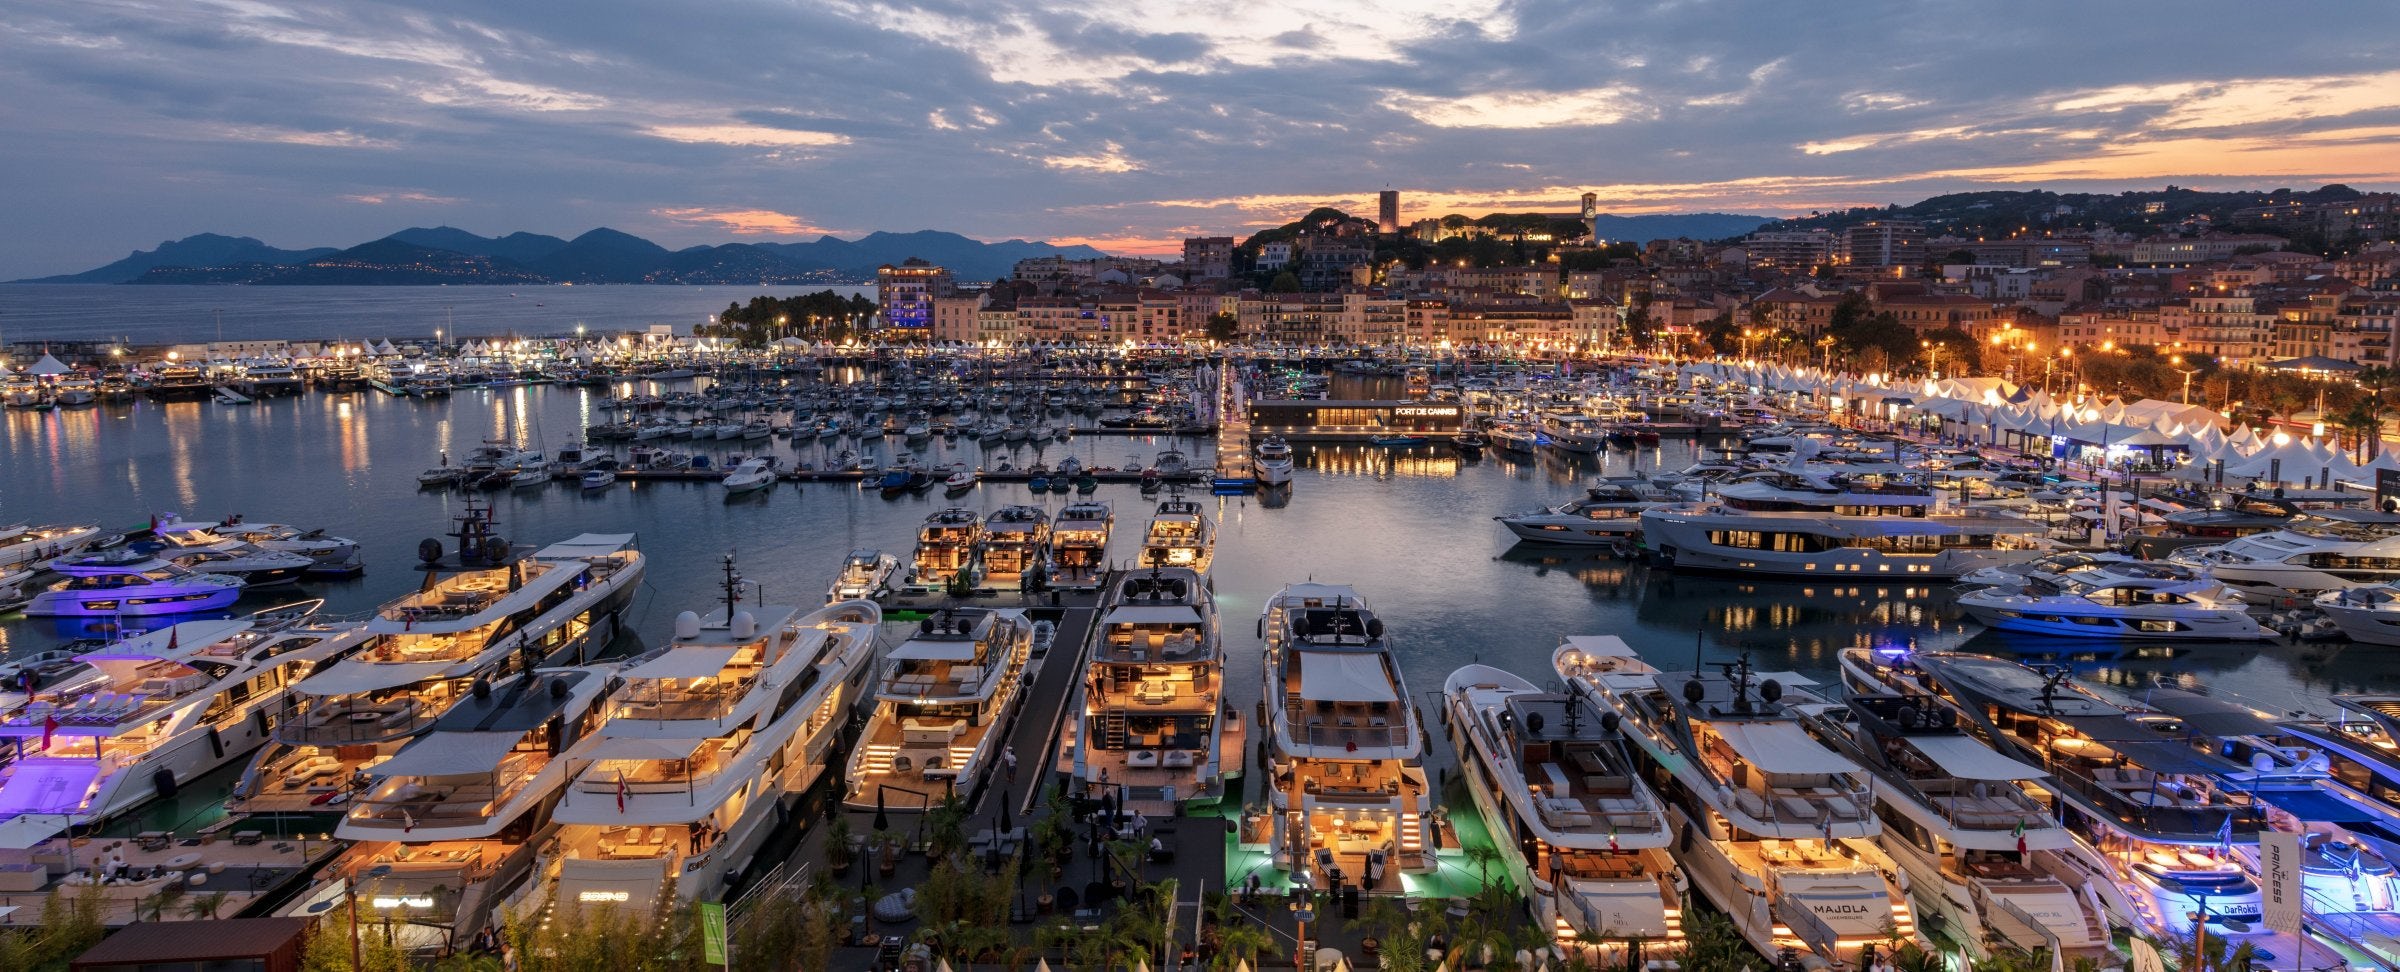 Vanquish Yachts welcomes you to the Cannes Yachting Festival  6-11 September 2022